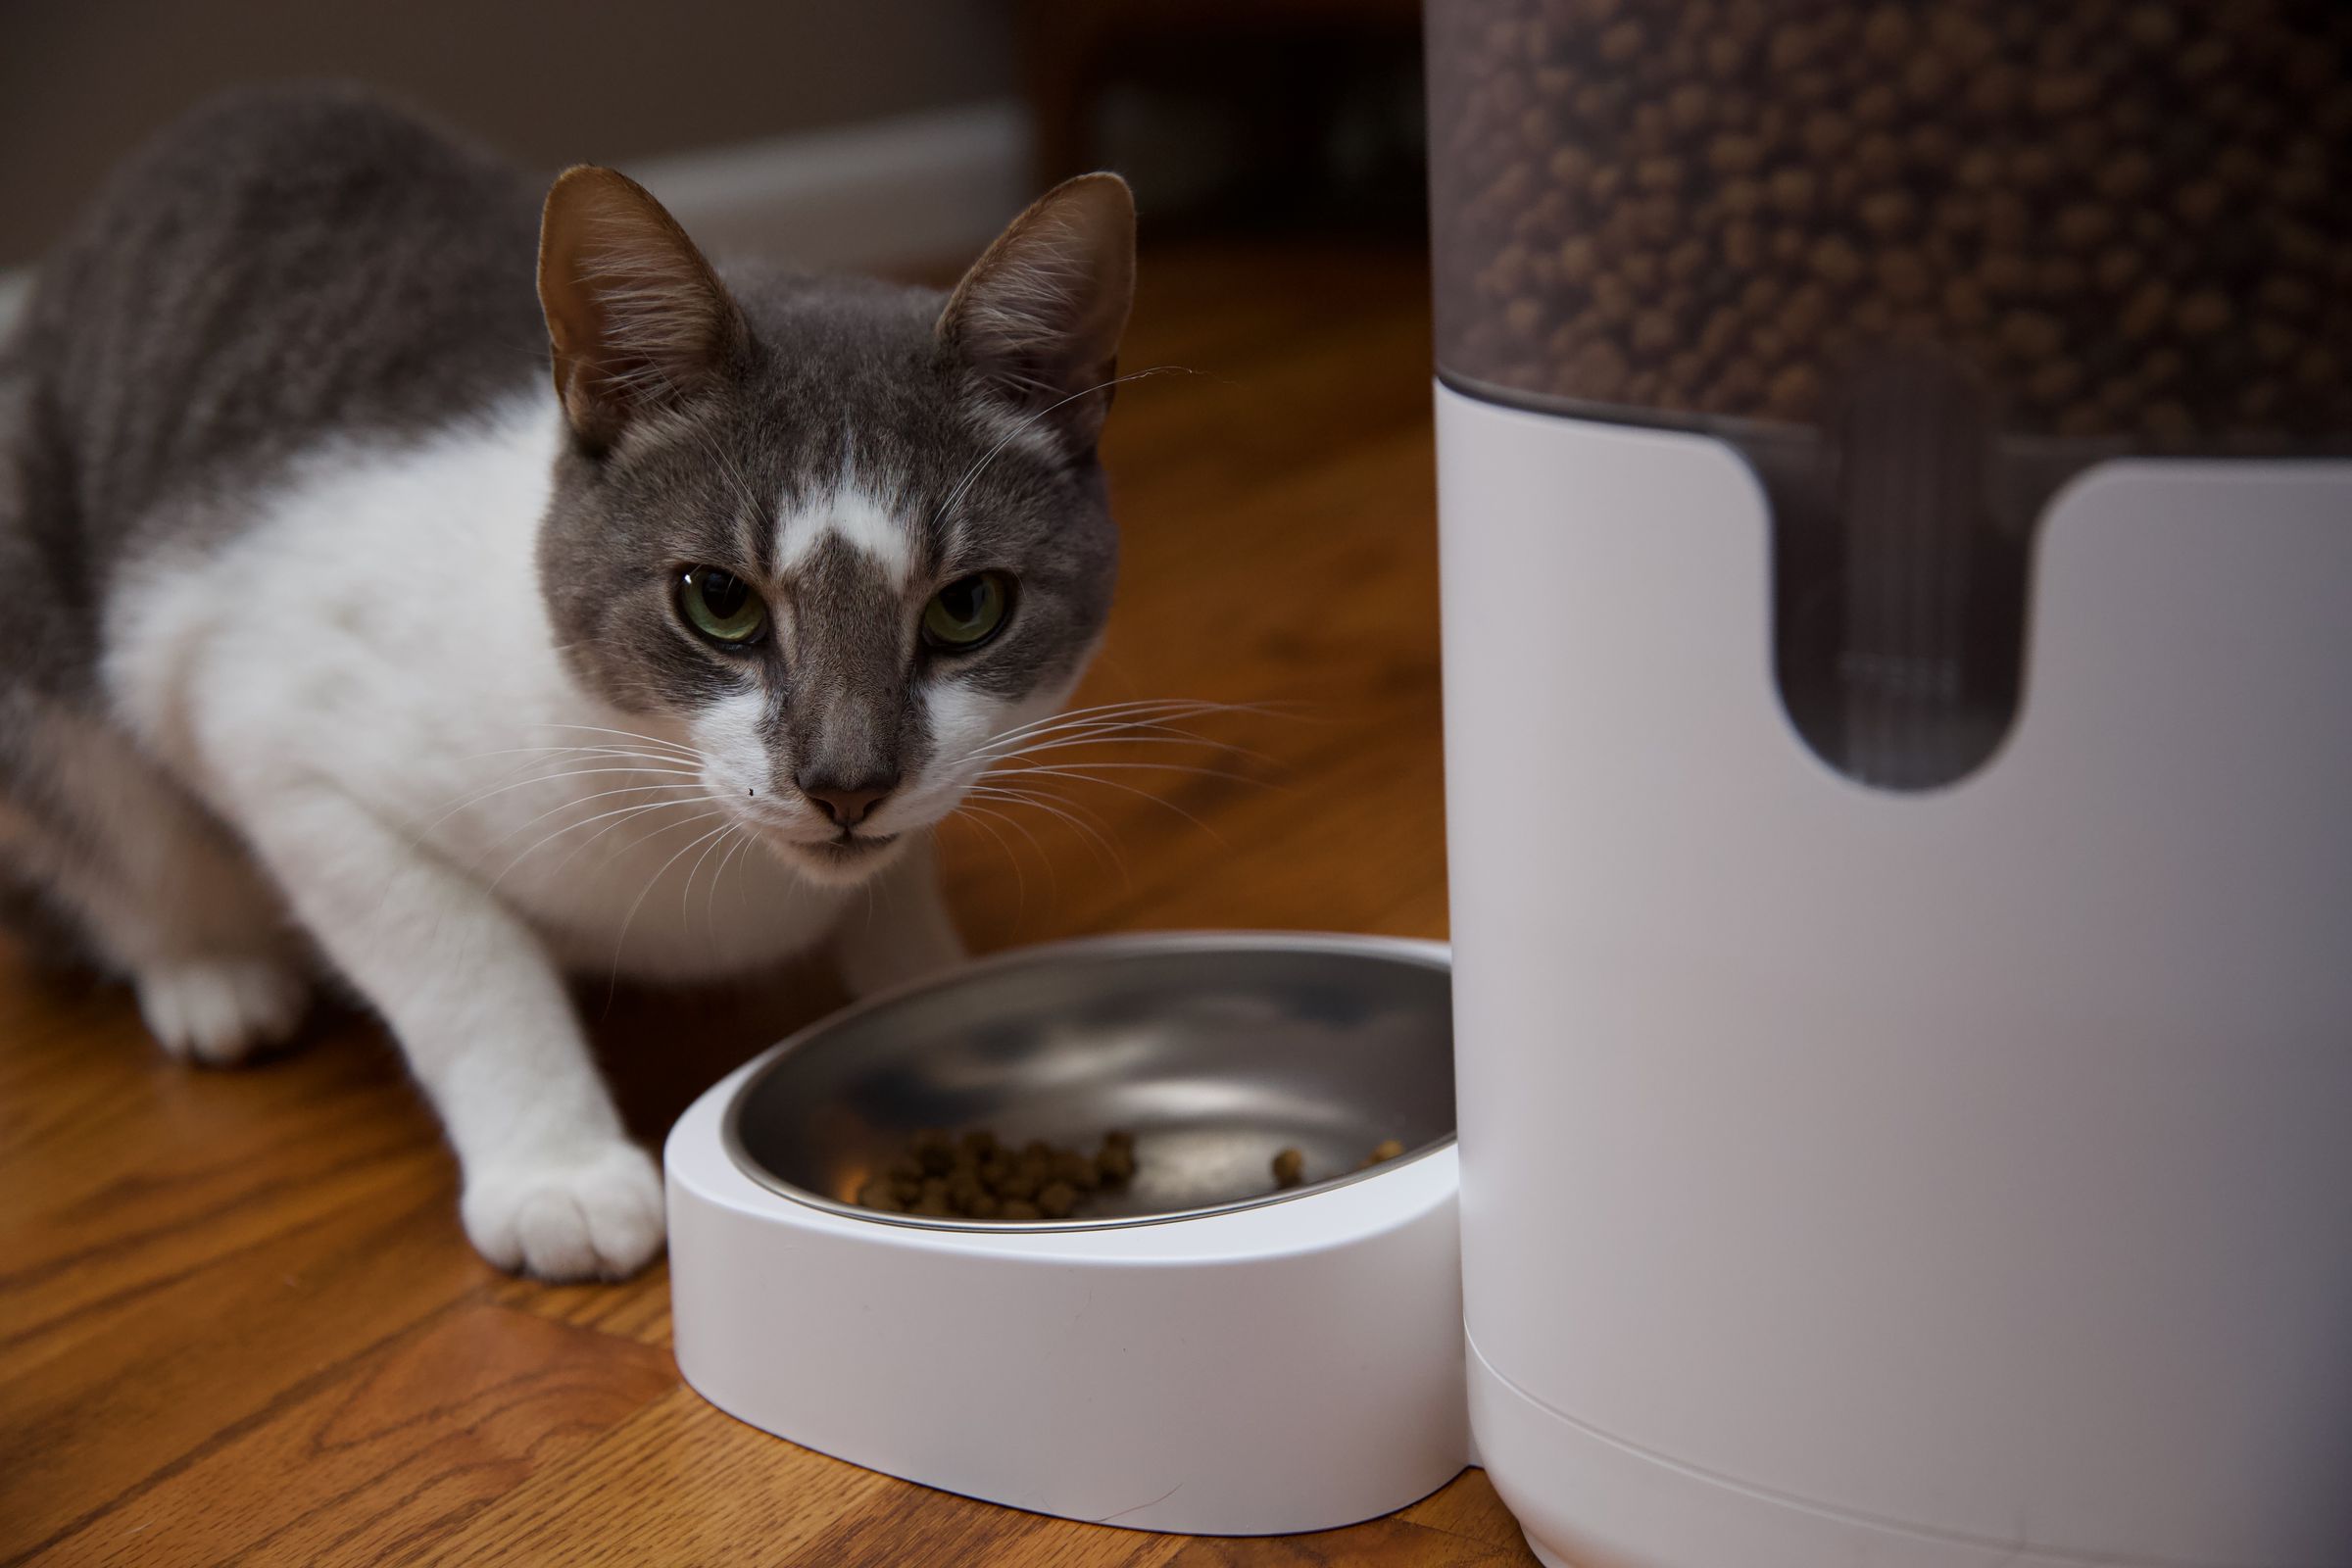 Cat eating from an automatic pet feeder.